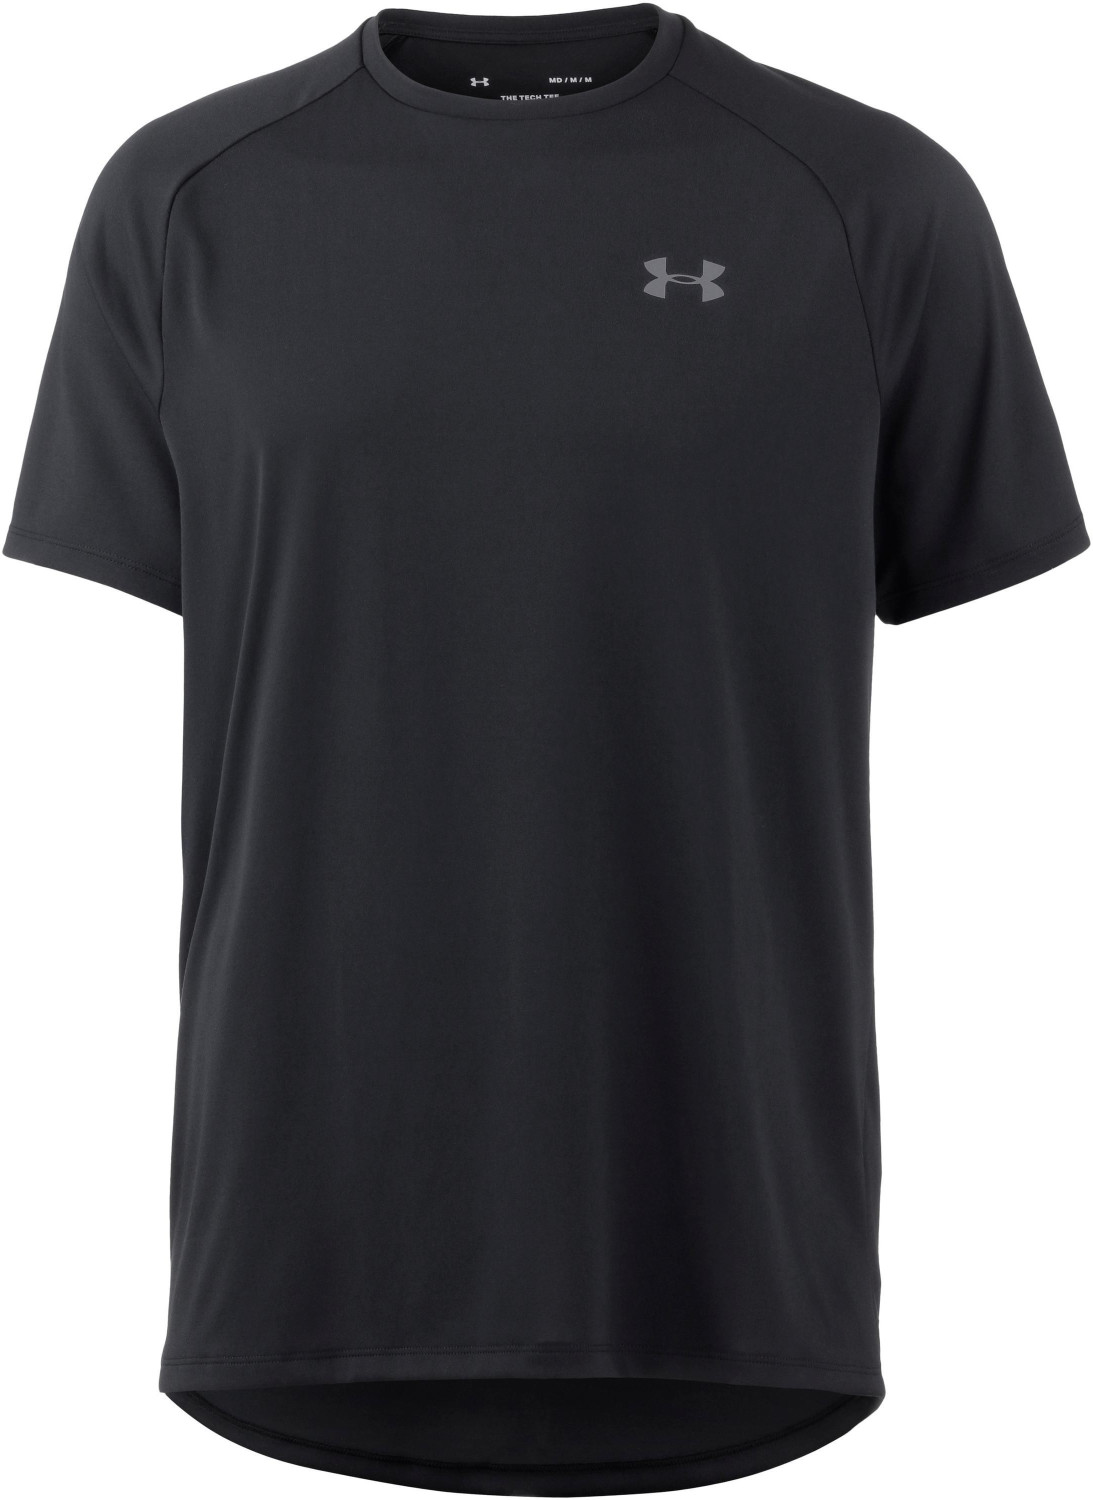 Buy Under Armour UA Tech T-Shirt from £17.00 (Today) – Best Deals on ...